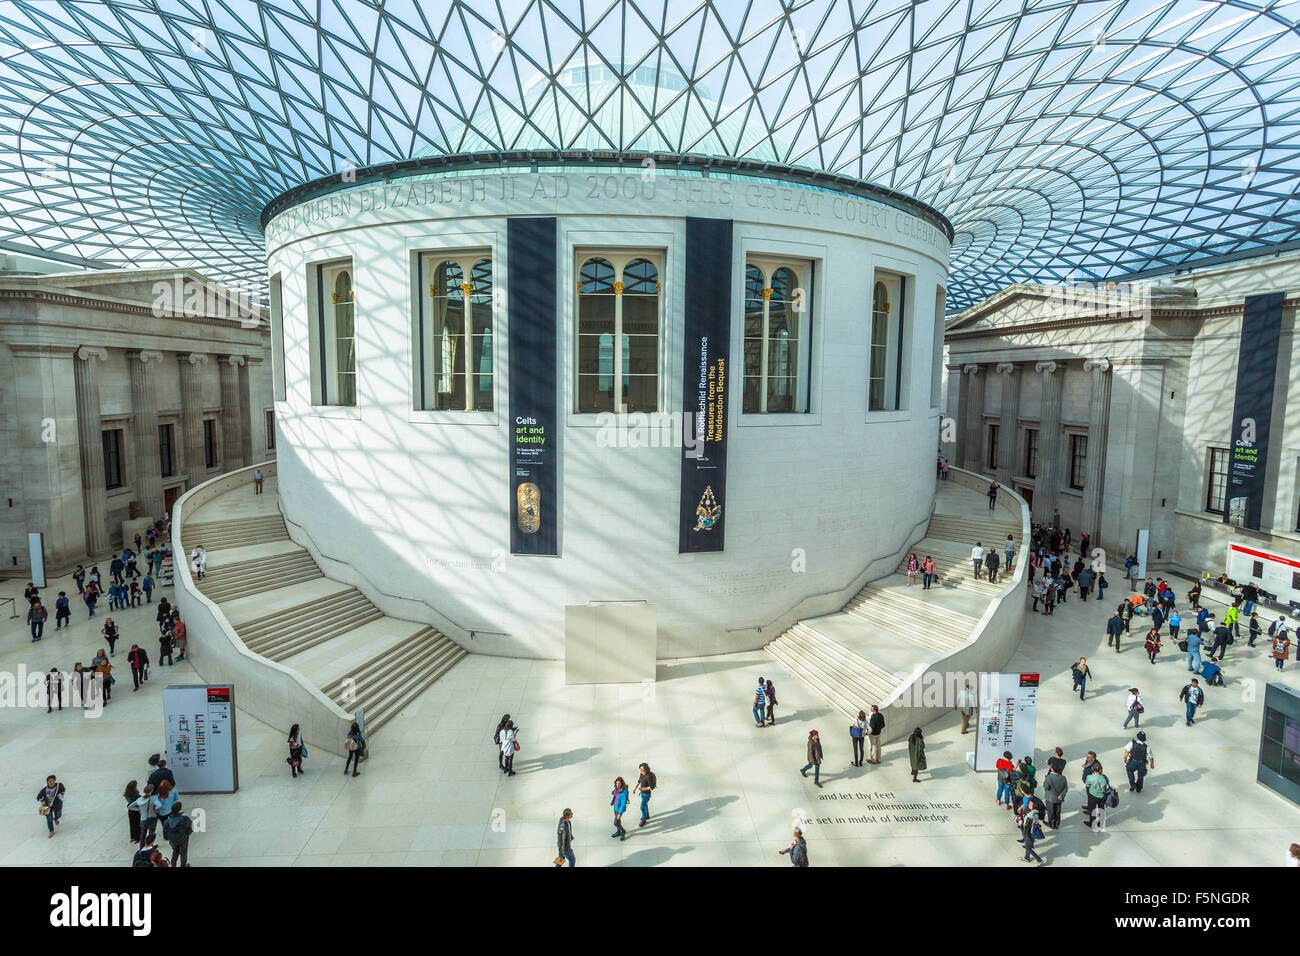 High angle view of the Queen Elizabeth II Great Court, British Museum, Bloomsbury, London, England, UK. Stock Photo